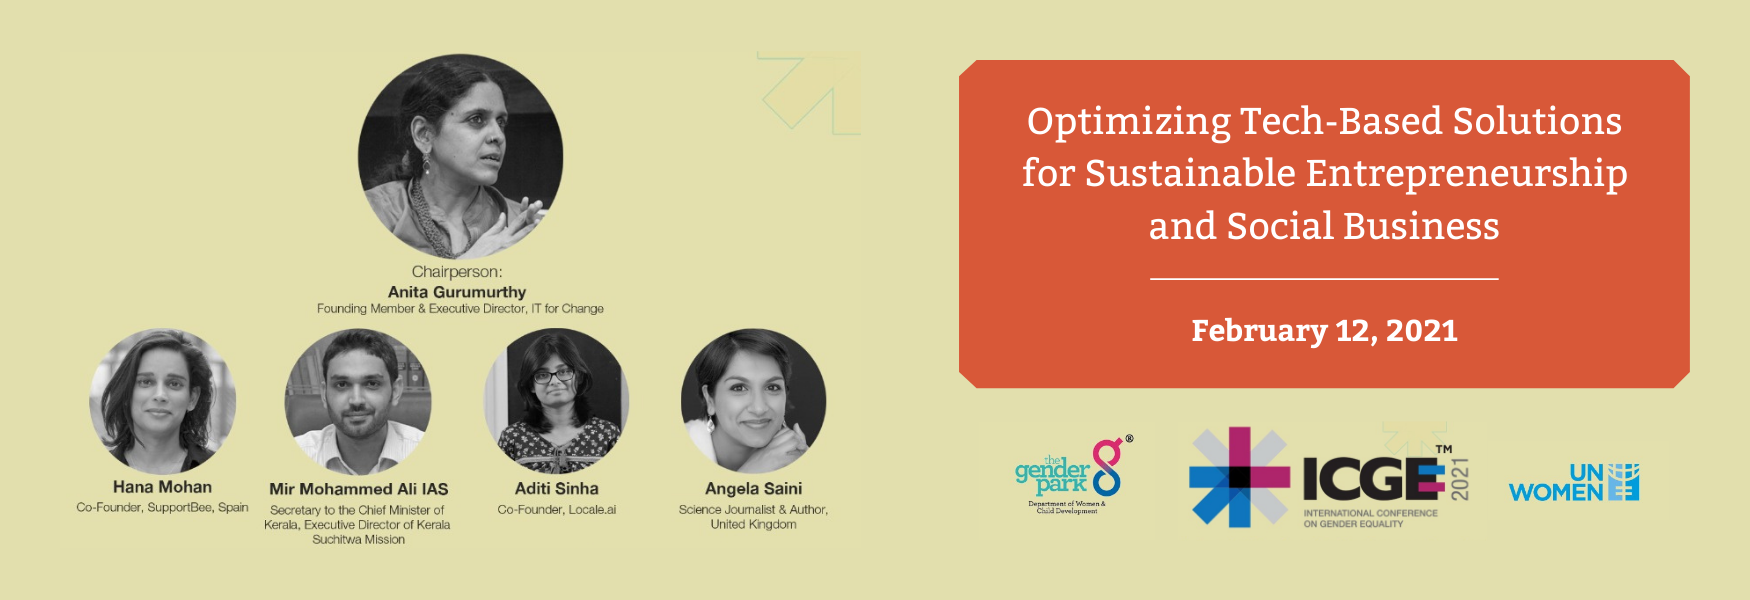 Optimizing Tech-Based Solutions for Sustainable Entrepreneurship and Social Business